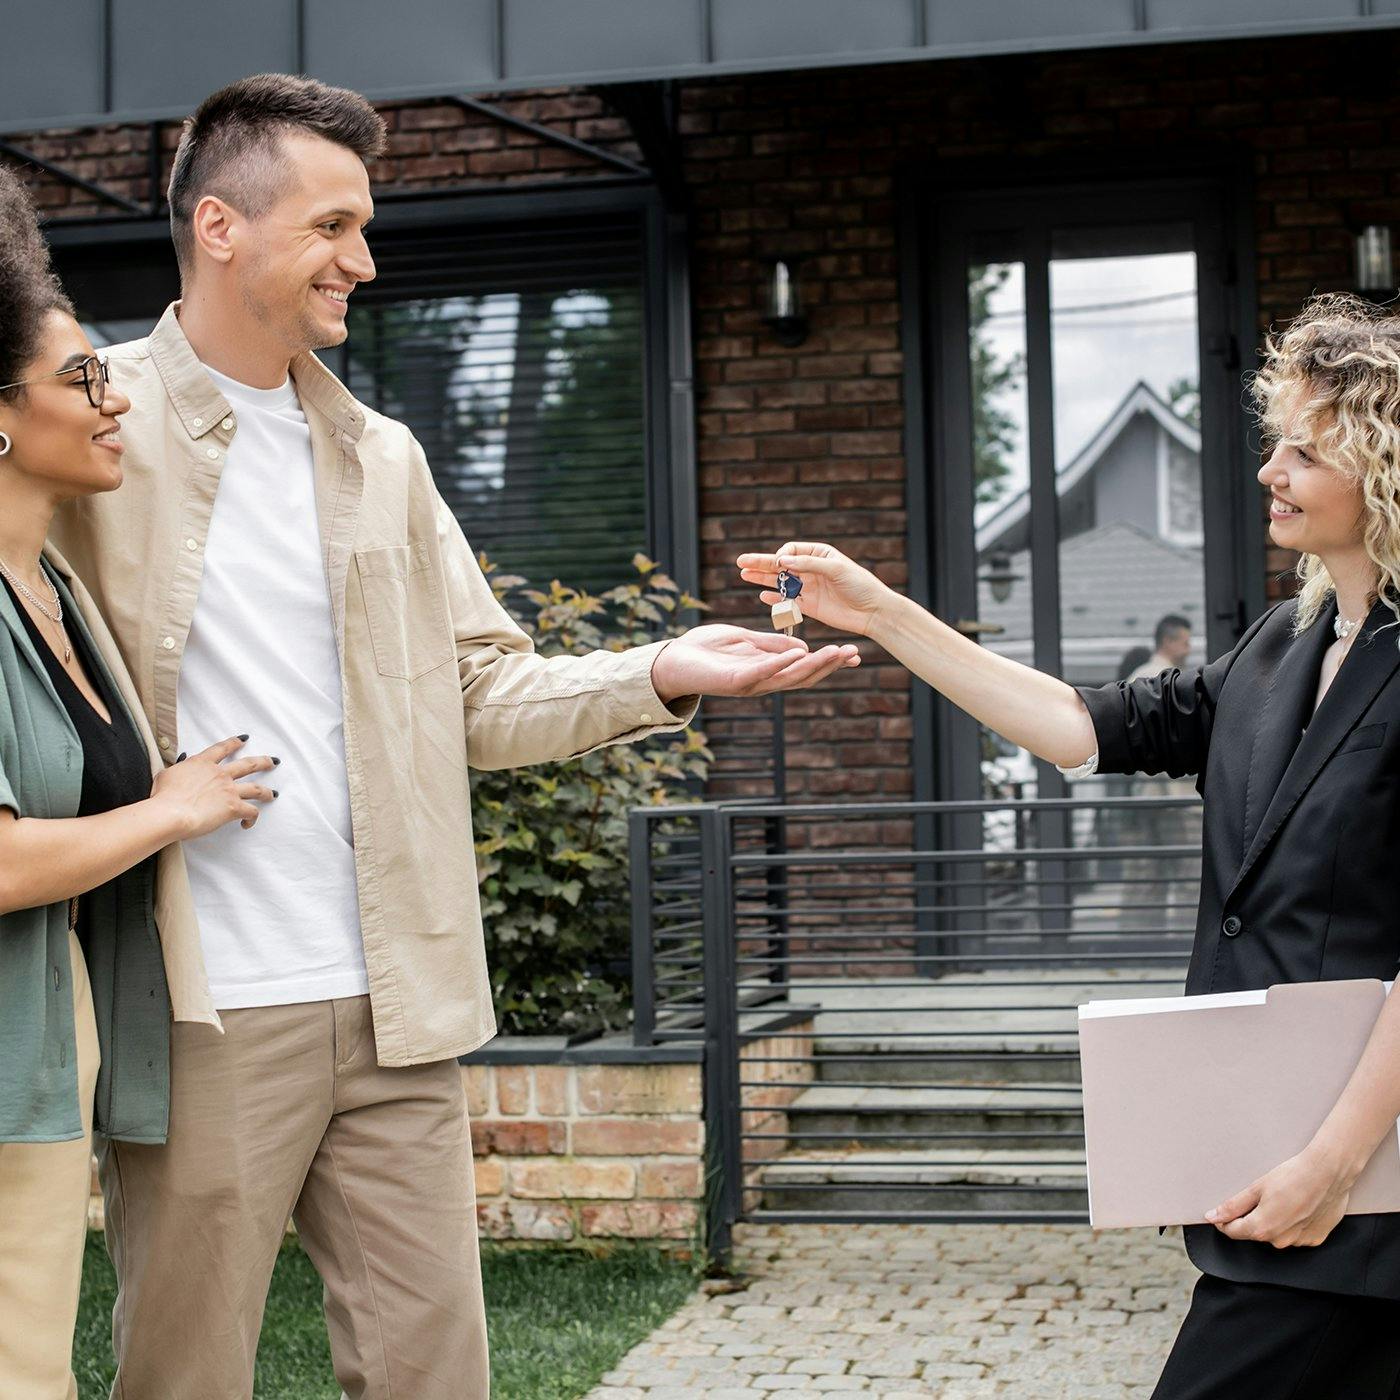 A couple receiving a pair of keys from a realtor